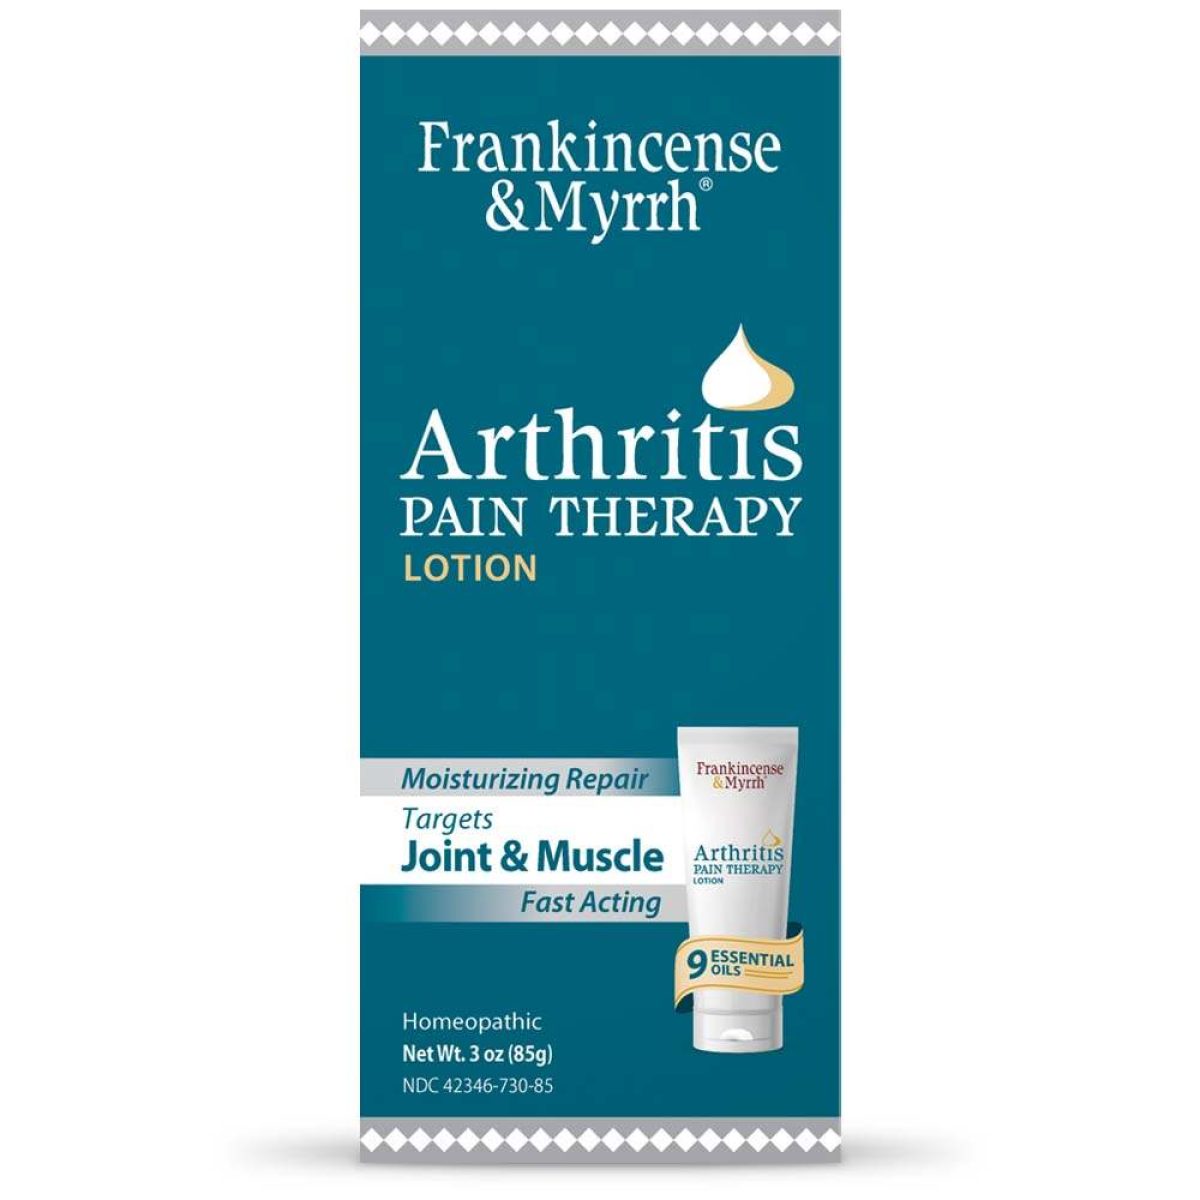 Frankincense & Myrrh Foot Therapy Lotion, Intensive - 3 oz